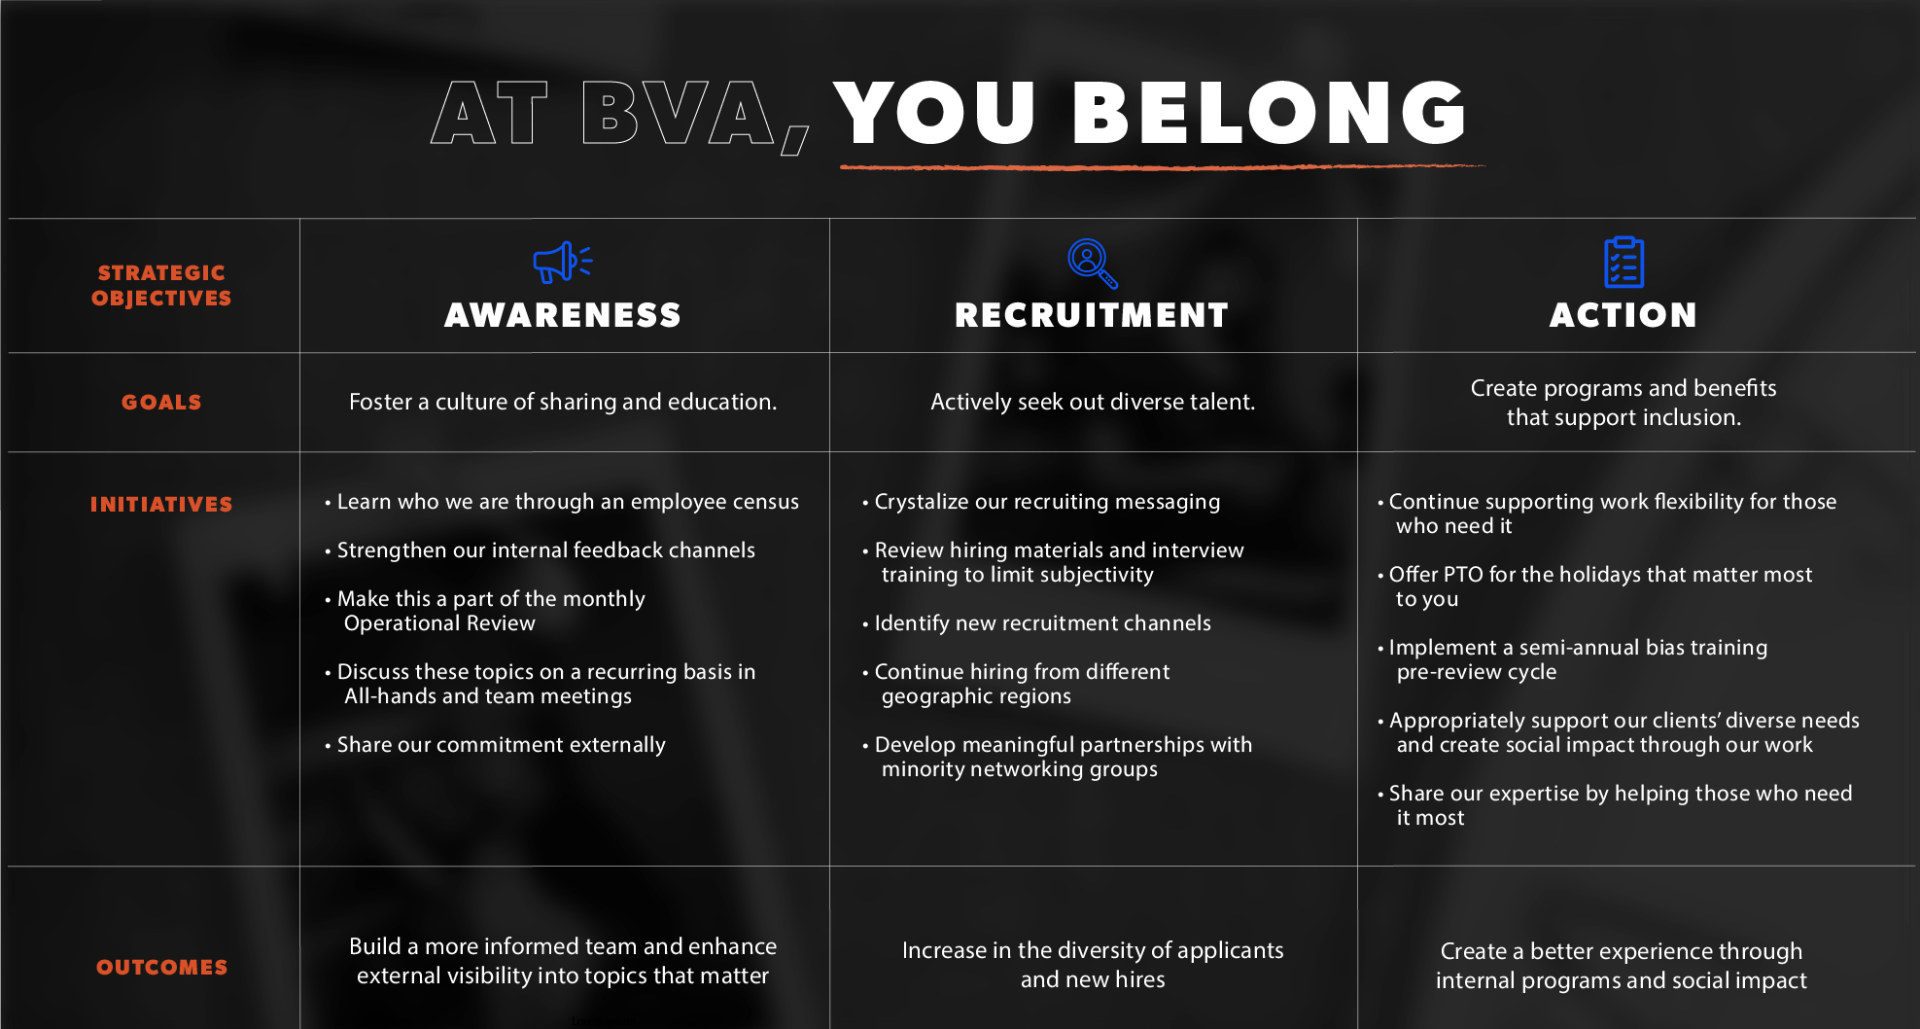 BVA Launches Our Agency’s Diversity & Inclusion Plan Featured Image